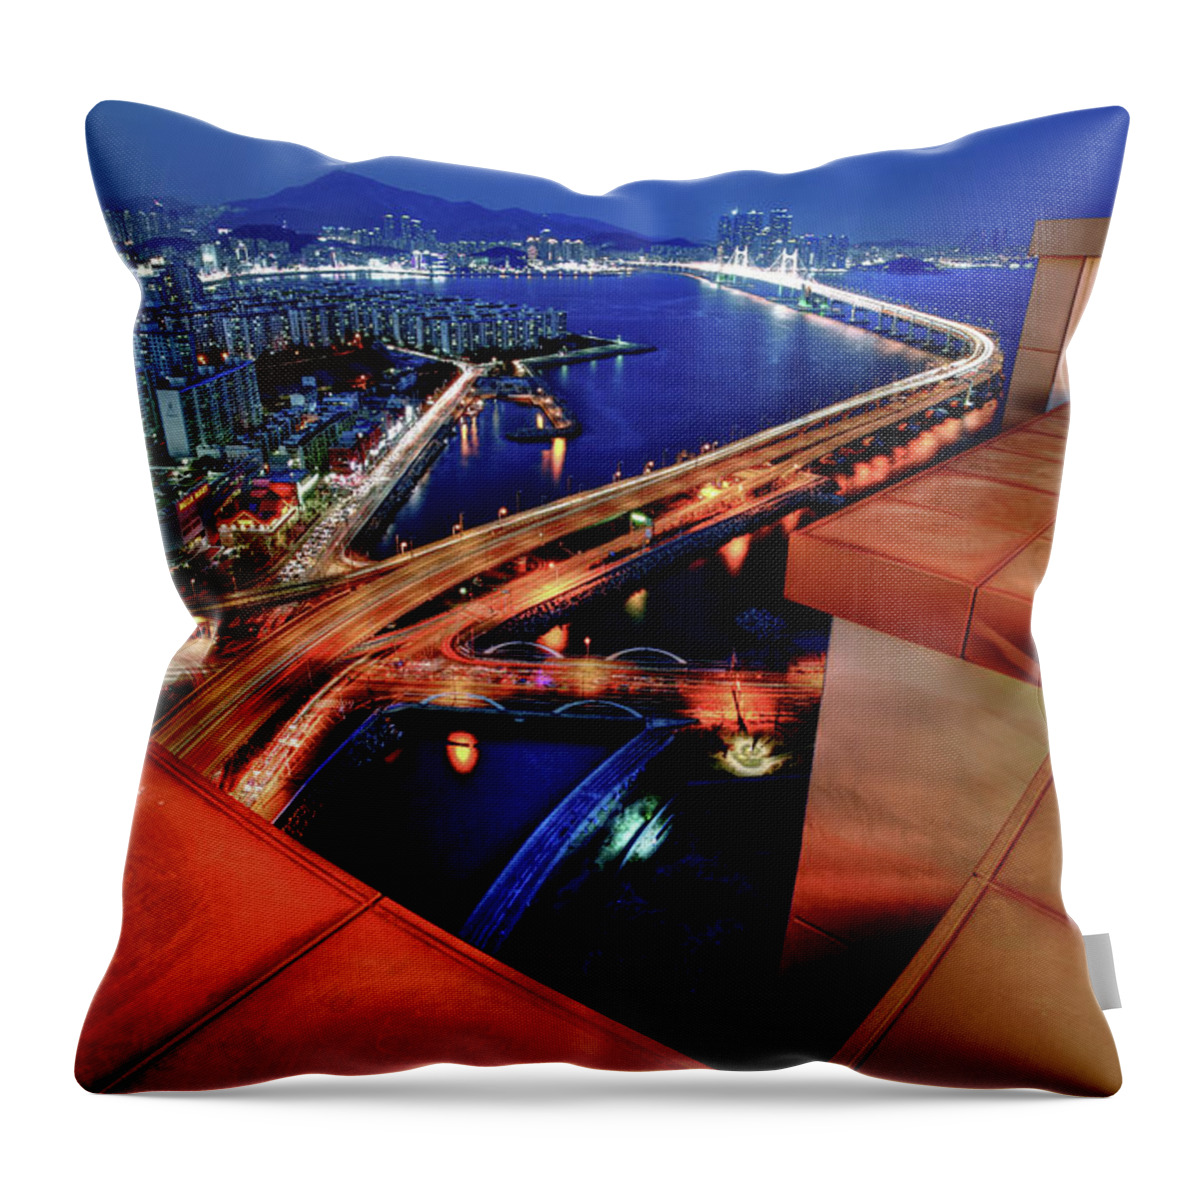 Built Structure Throw Pillow featuring the photograph Urban Blocks - Busan, S.korea by Photography By Simon Bond